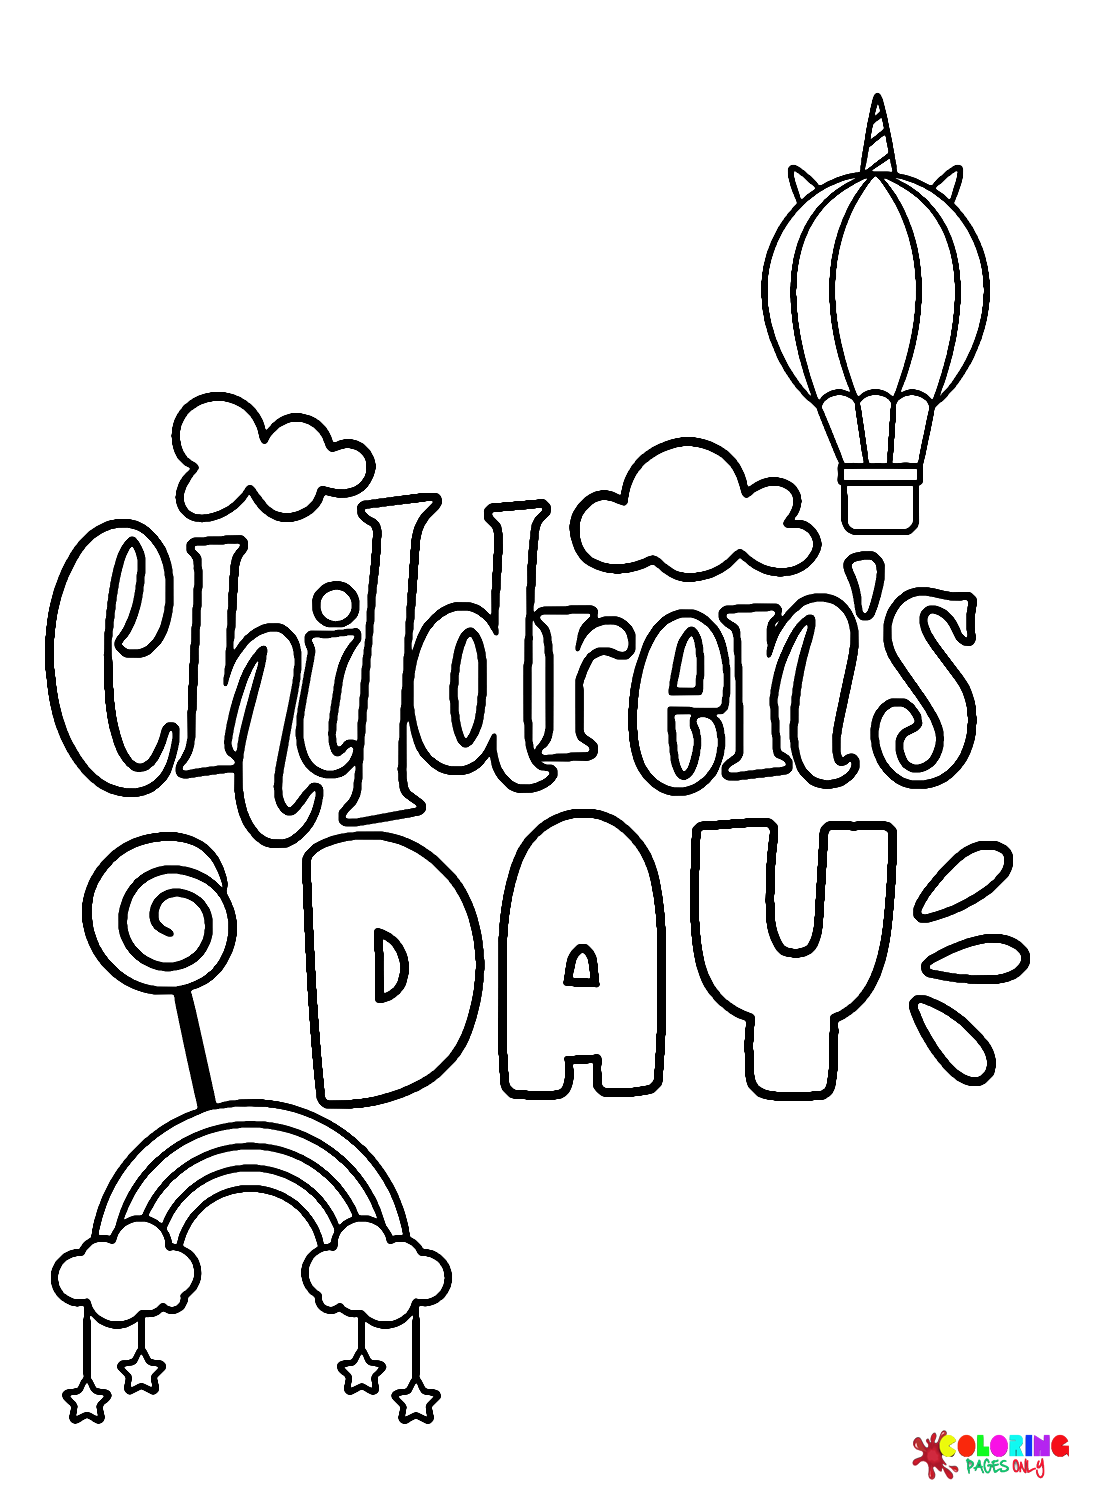 Happy Children’s Day Coloring Pages